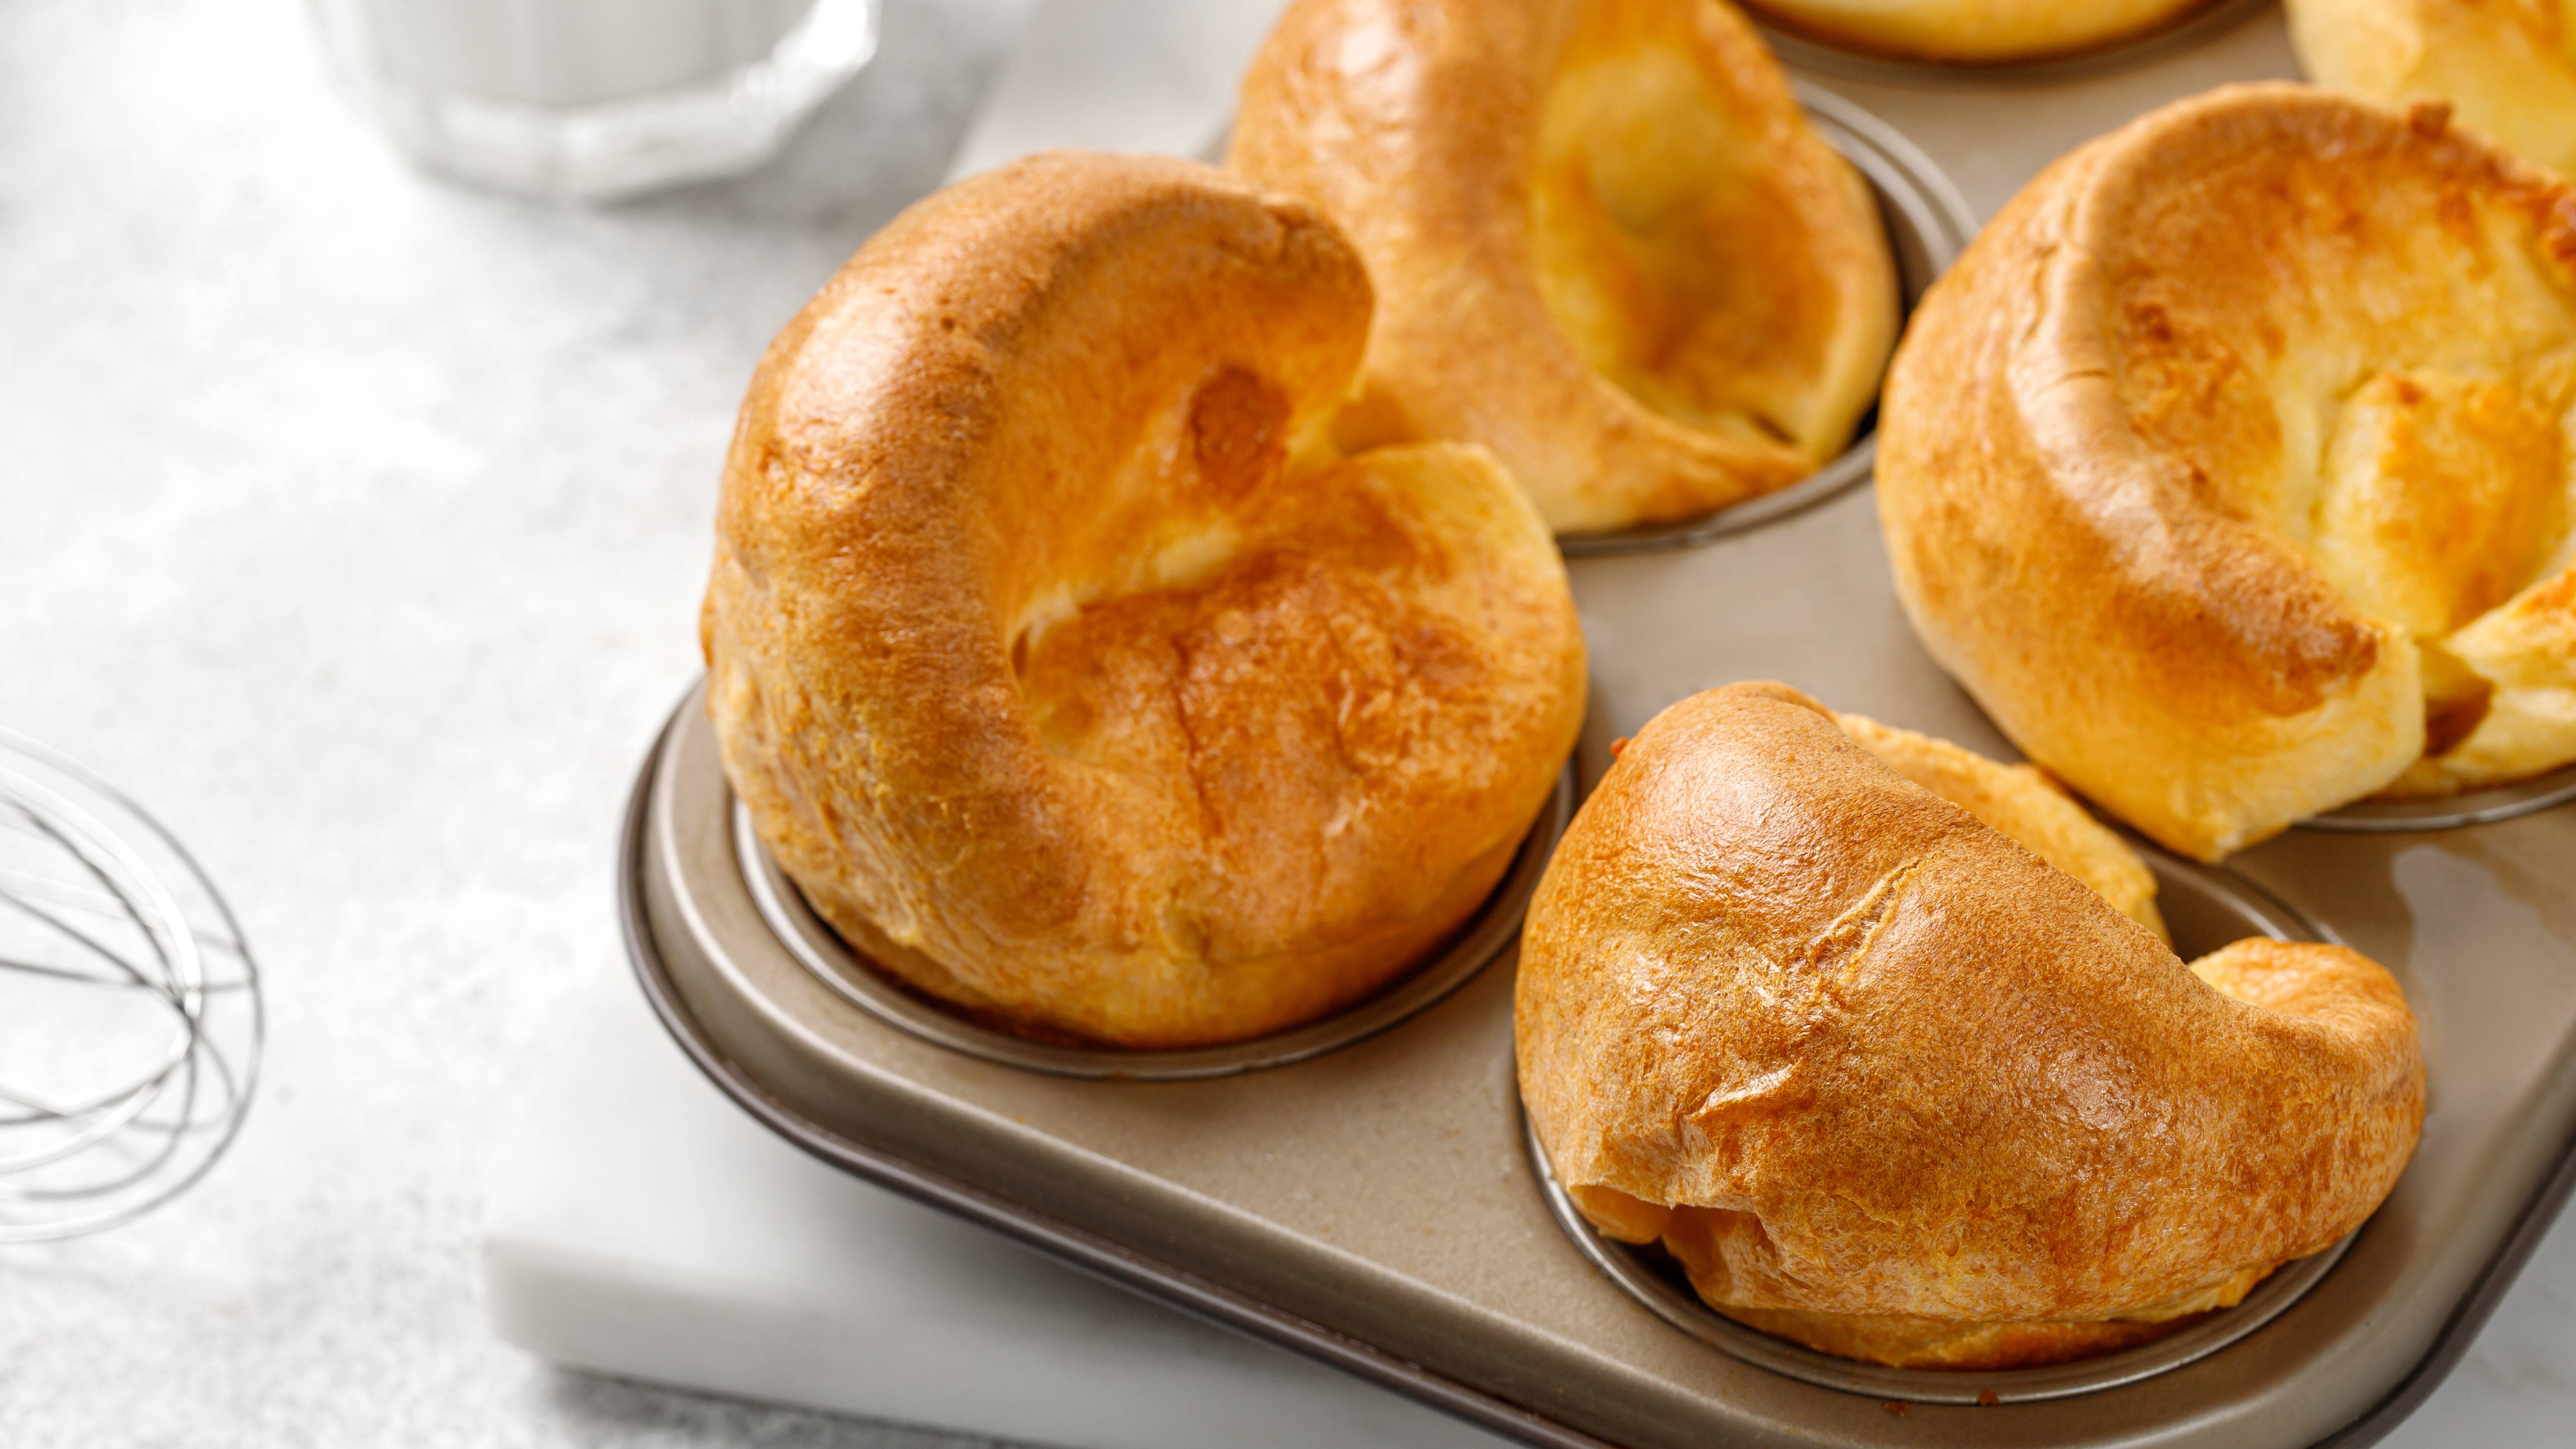 Easy family size Yorkshire pudding recipe to serve four people